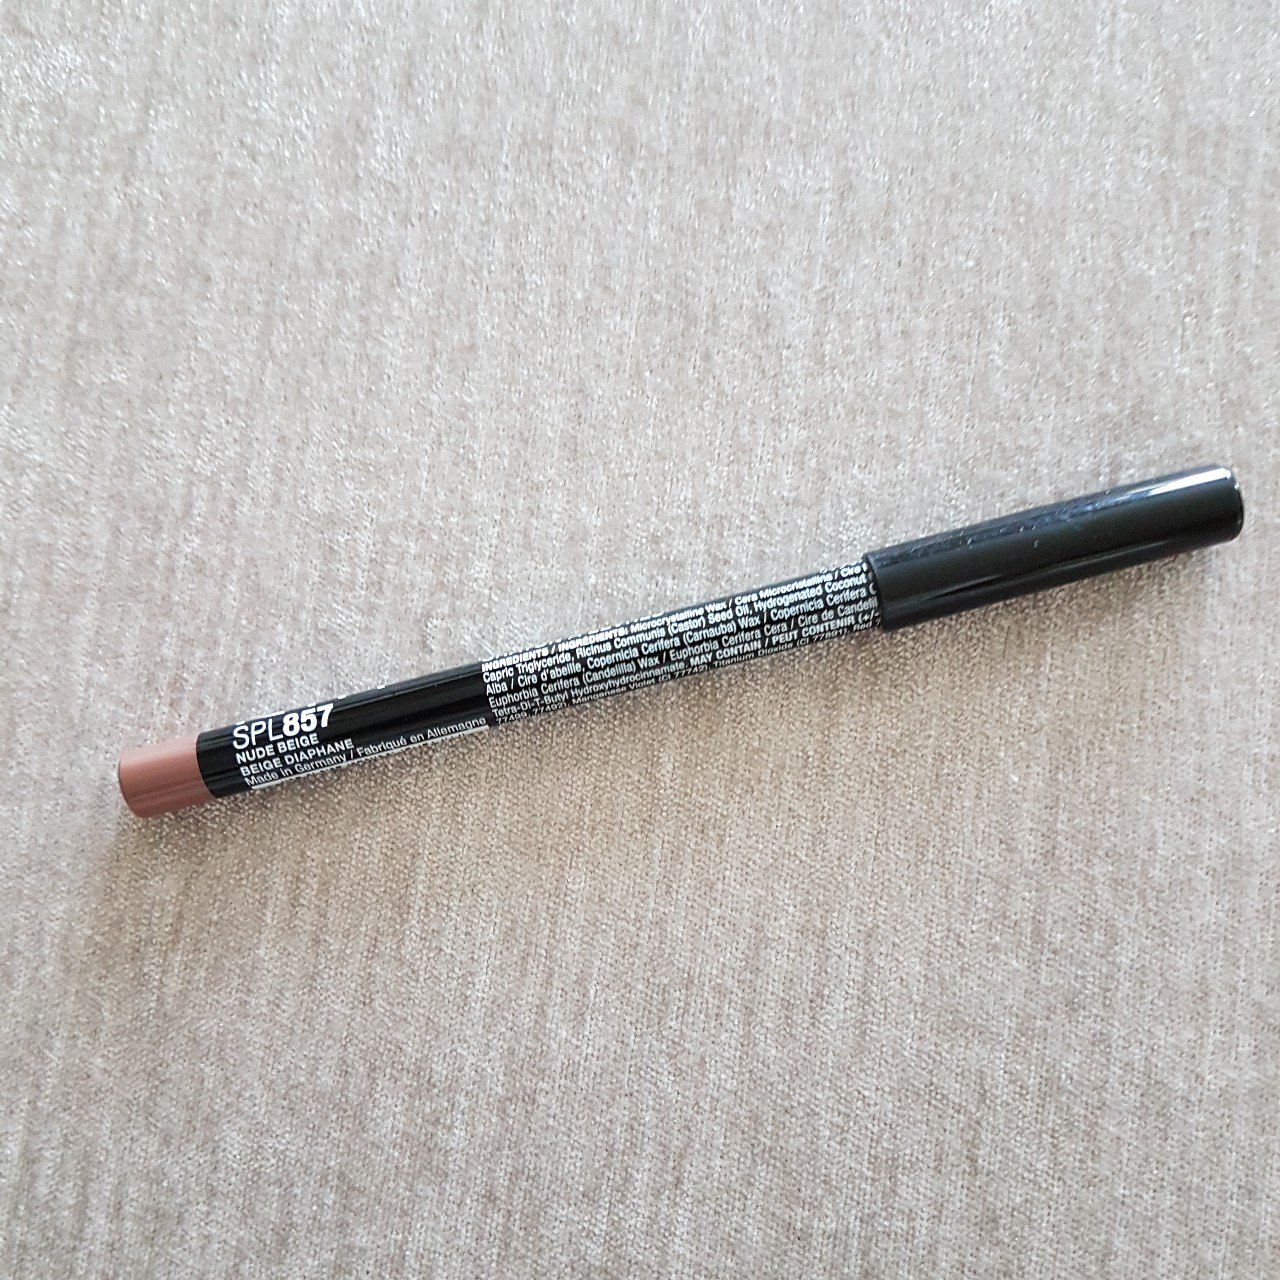 https://media.karousell.com/media/photos/products/2017/07/15/nyx_lip_liner_in_nude_beige_dupe_for_mac_stripdown_free_shipping_1500059644_b5cfc0db0